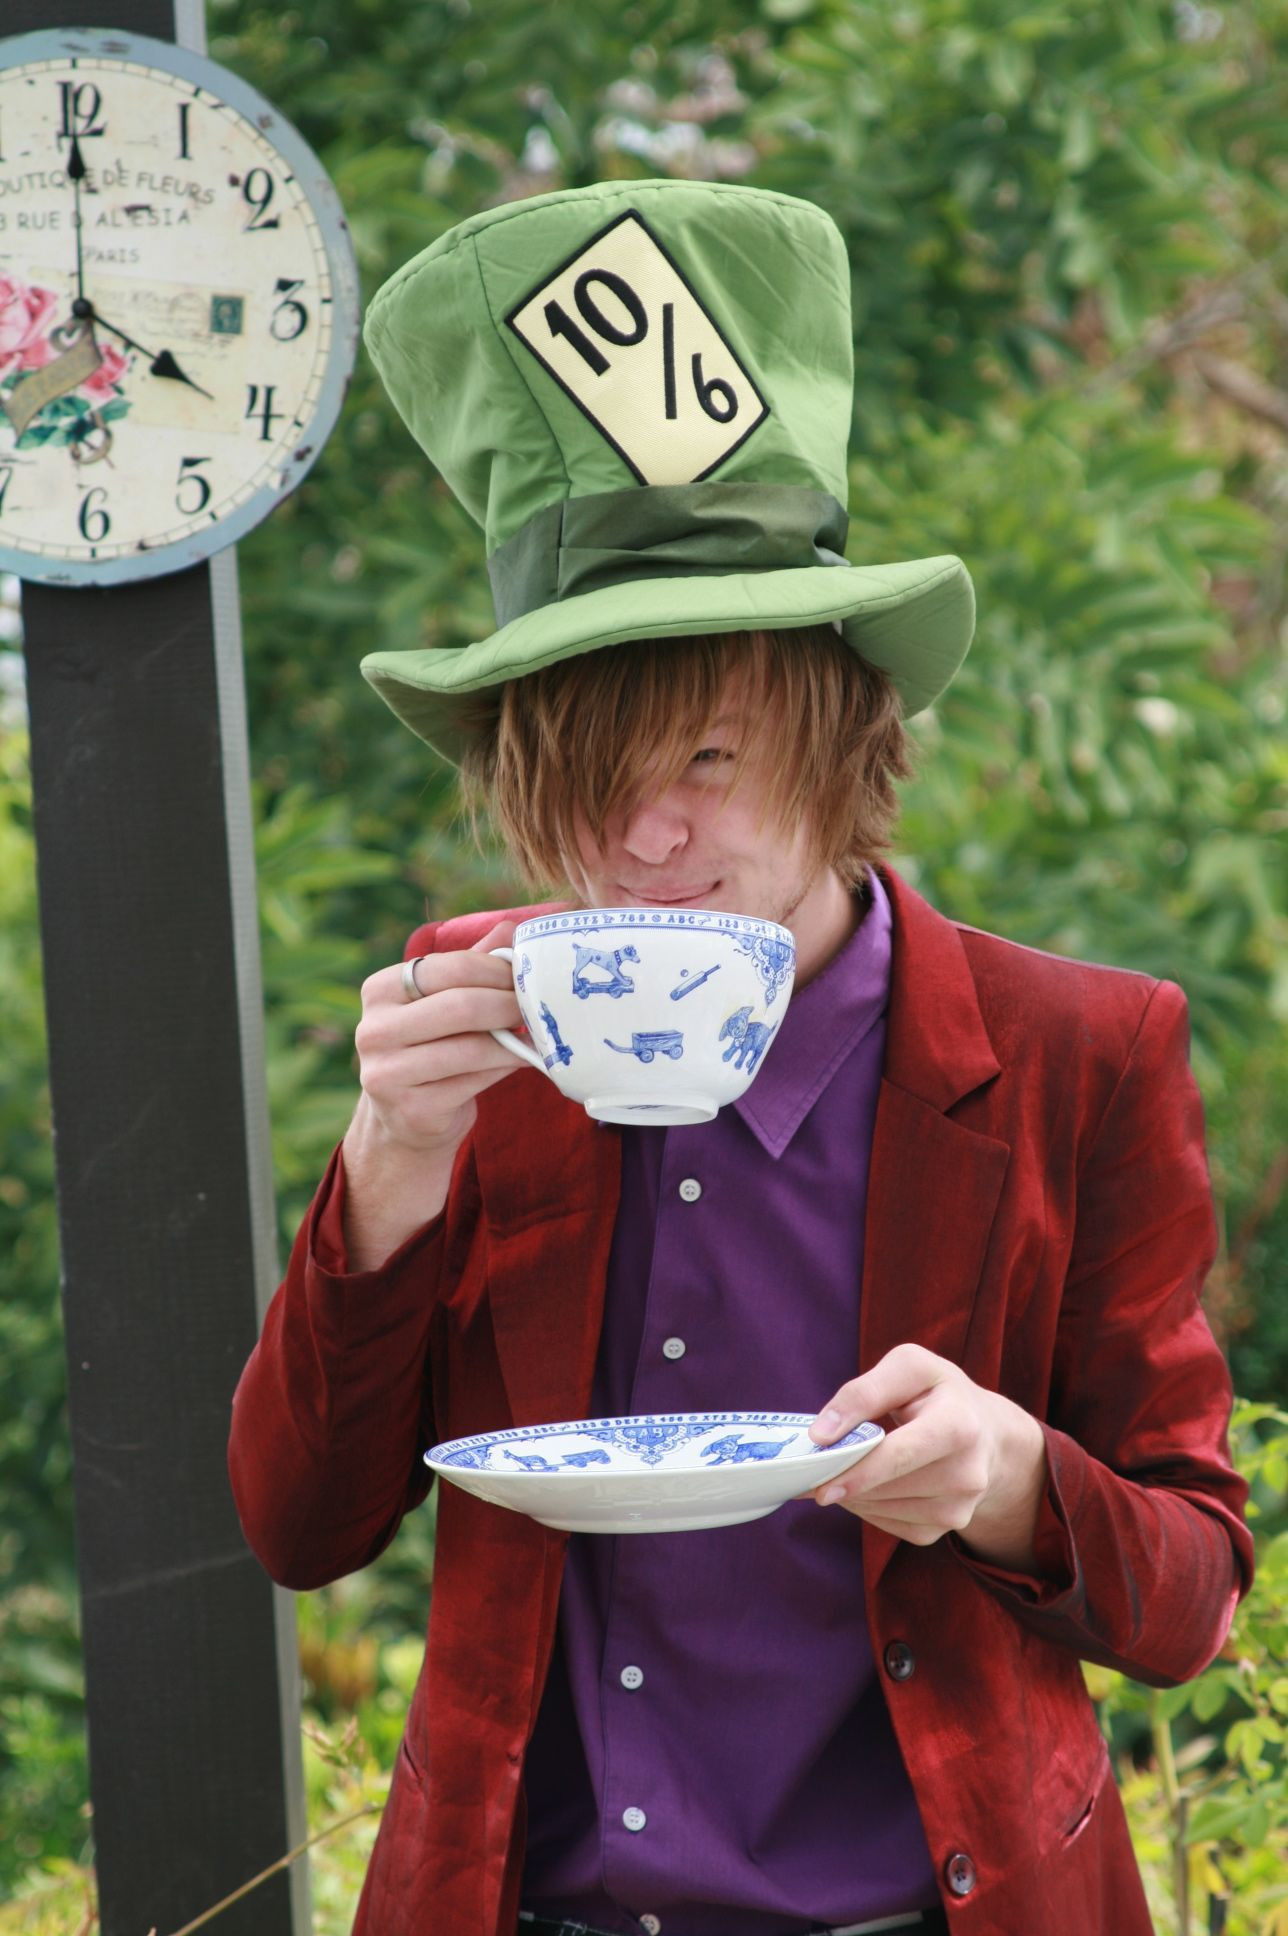 Mad Hatter Tea Party Costume Ideas
 MaD HaTTeR Easter Tea Party Easter Tea